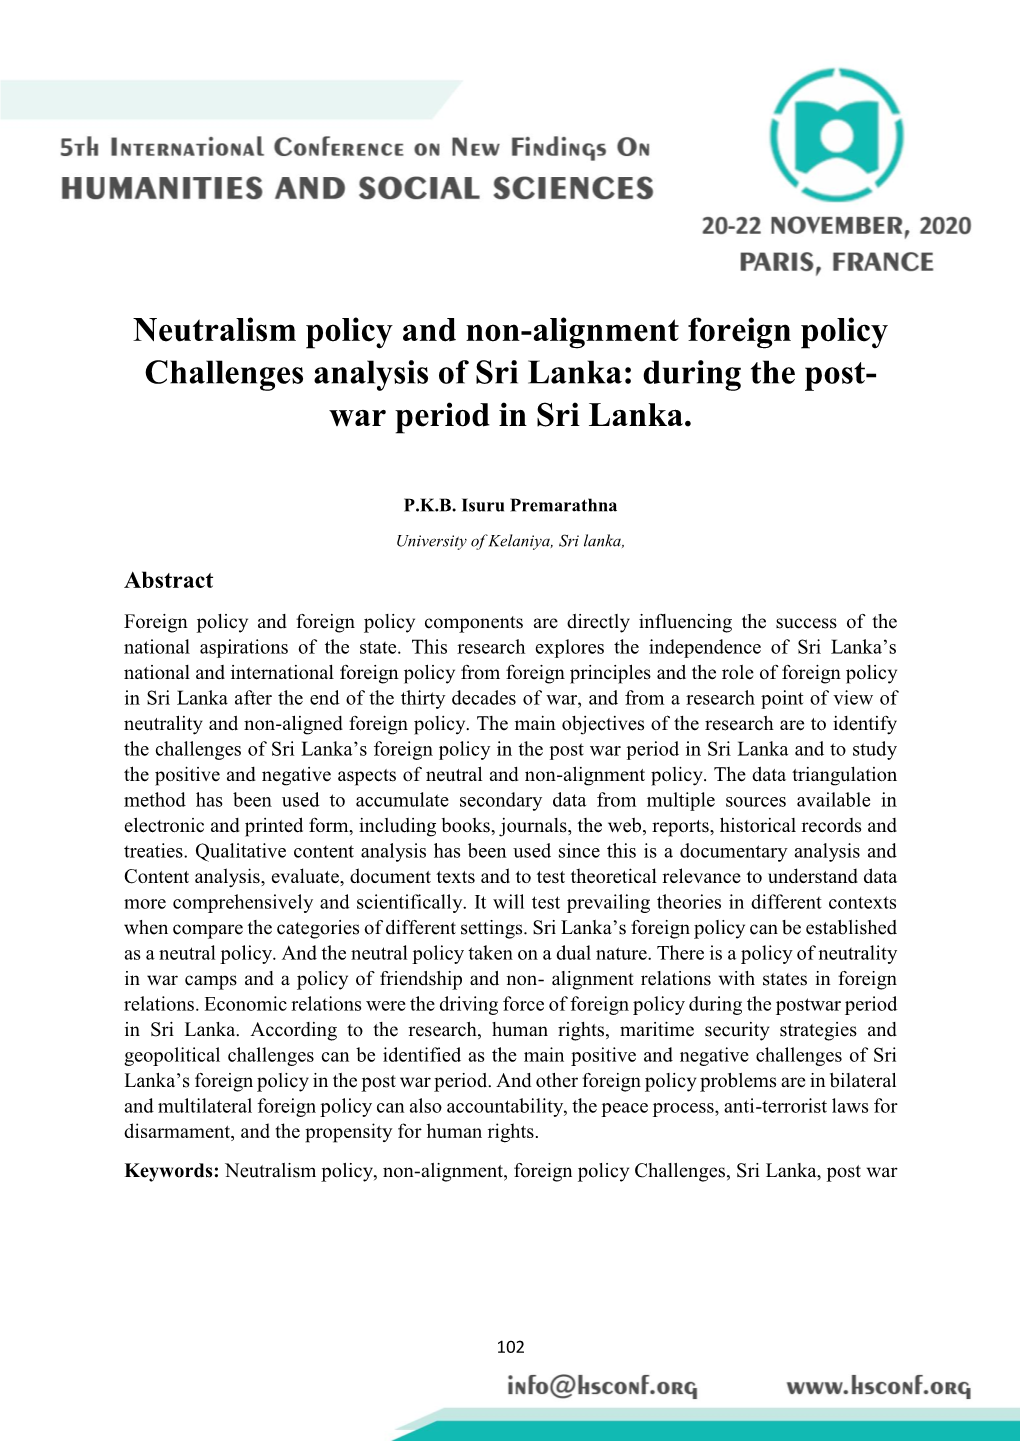 Neutralism Policy and Non-Alignment Foreign Policy Challenges Analysis of Sri Lanka: During the Post- War Period in Sri Lanka